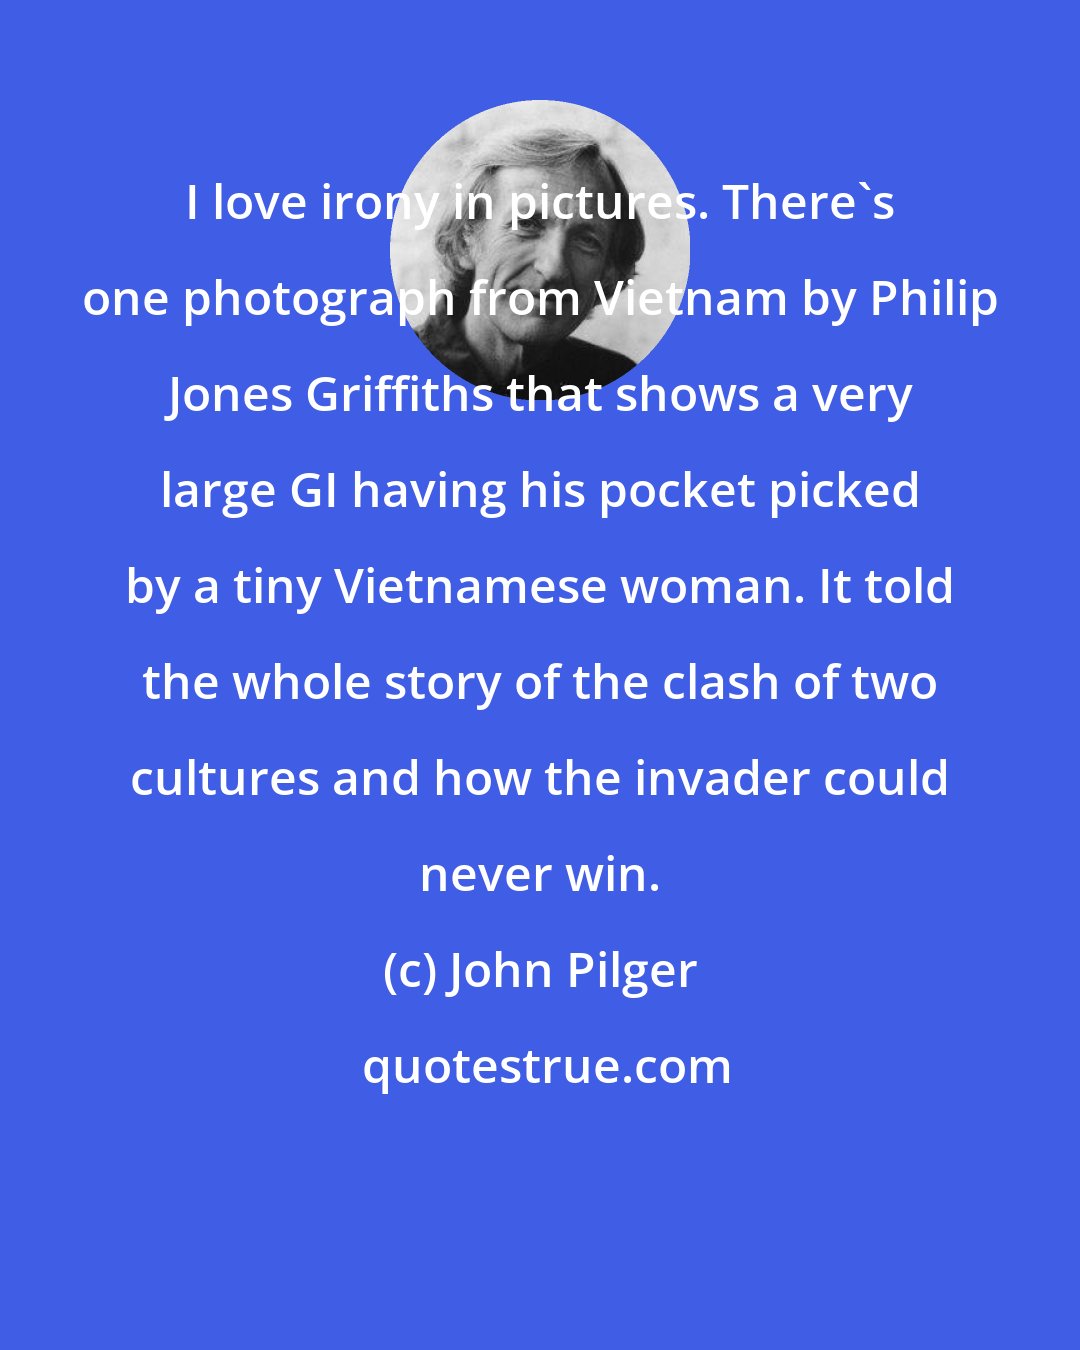 John Pilger: I love irony in pictures. There's one photograph from Vietnam by Philip Jones Griffiths that shows a very large GI having his pocket picked by a tiny Vietnamese woman. It told the whole story of the clash of two cultures and how the invader could never win.